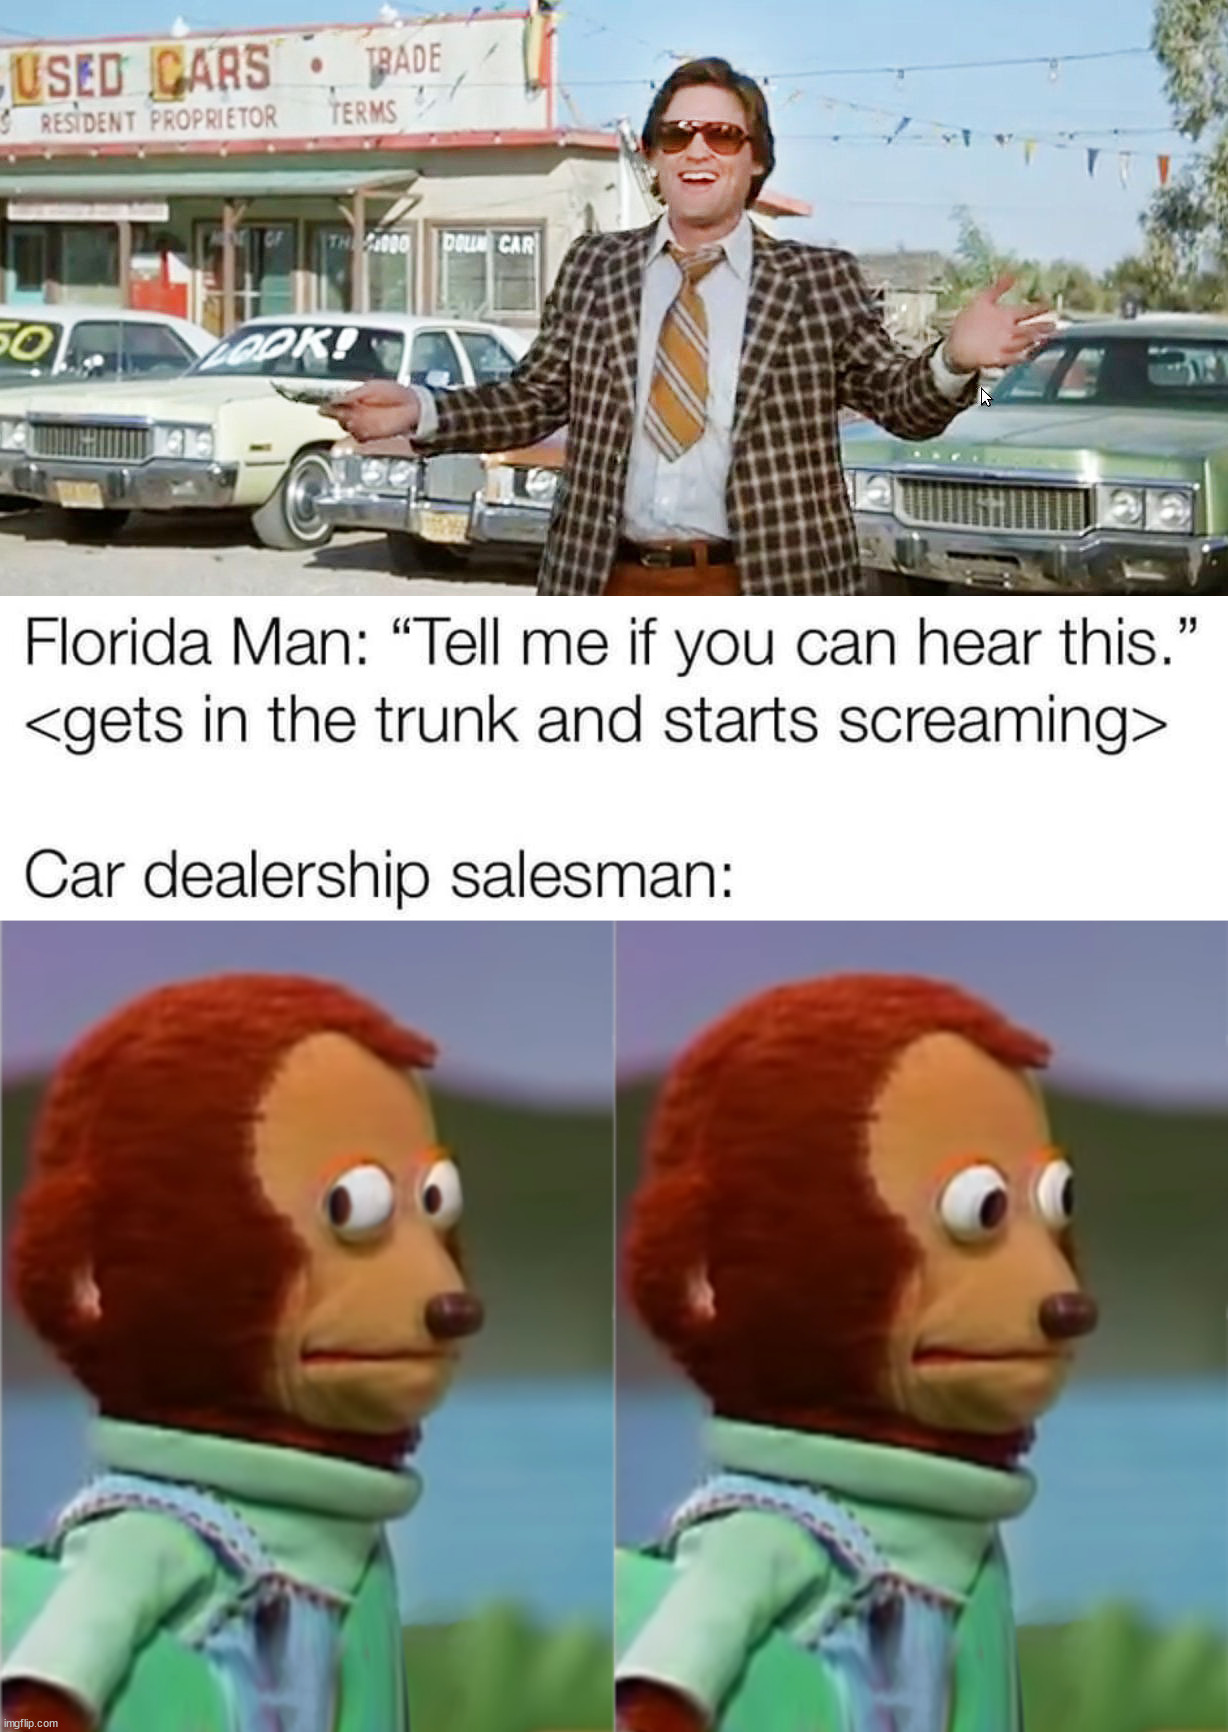 Can you hear the screams? | image tagged in used car salesman,awkward look,screaming,cars | made w/ Imgflip meme maker